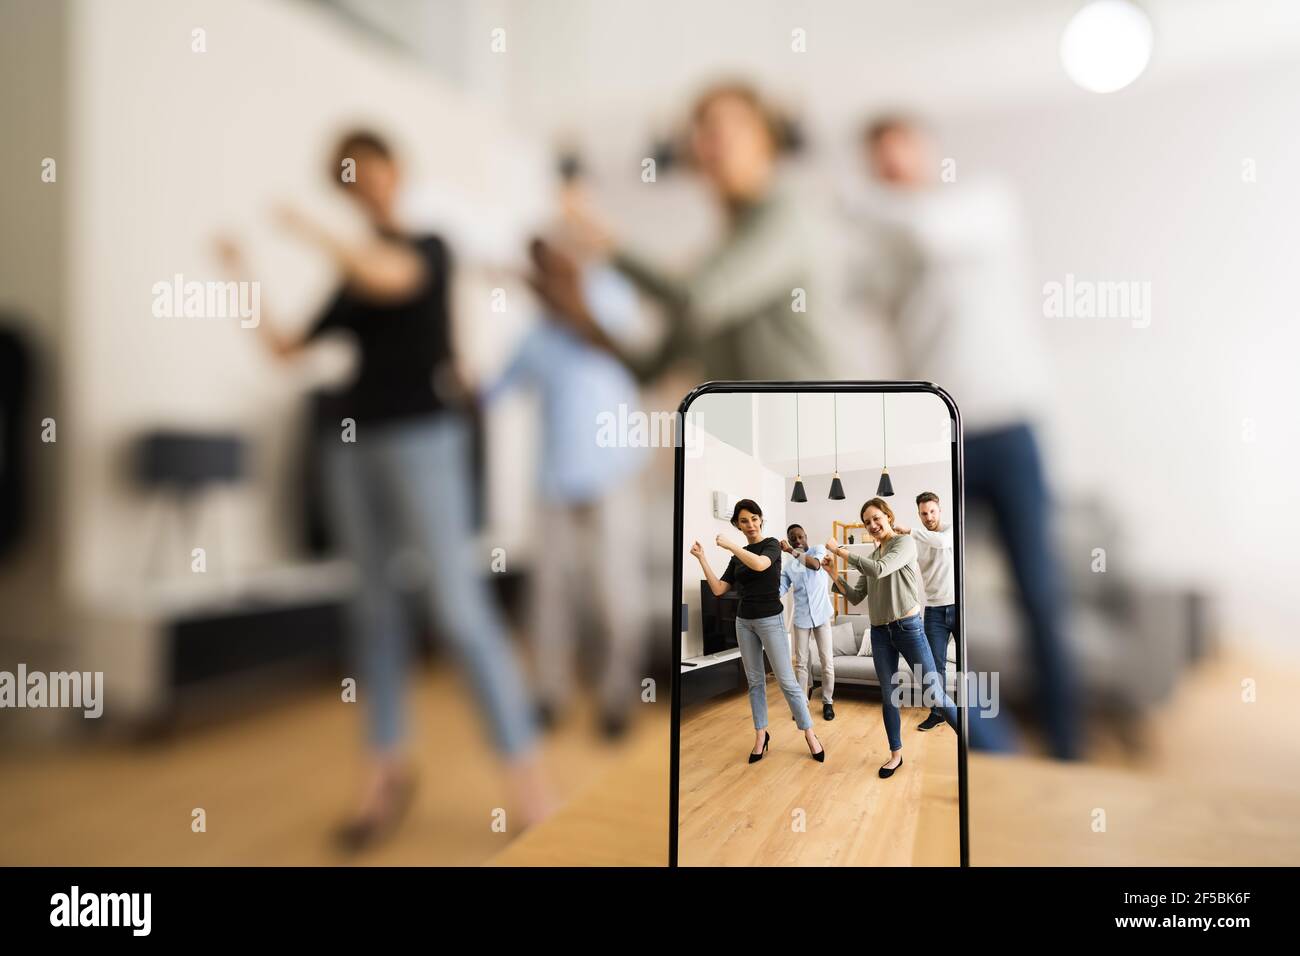 Young Happy Group Dance For Mobile Phone Video Stock Photo